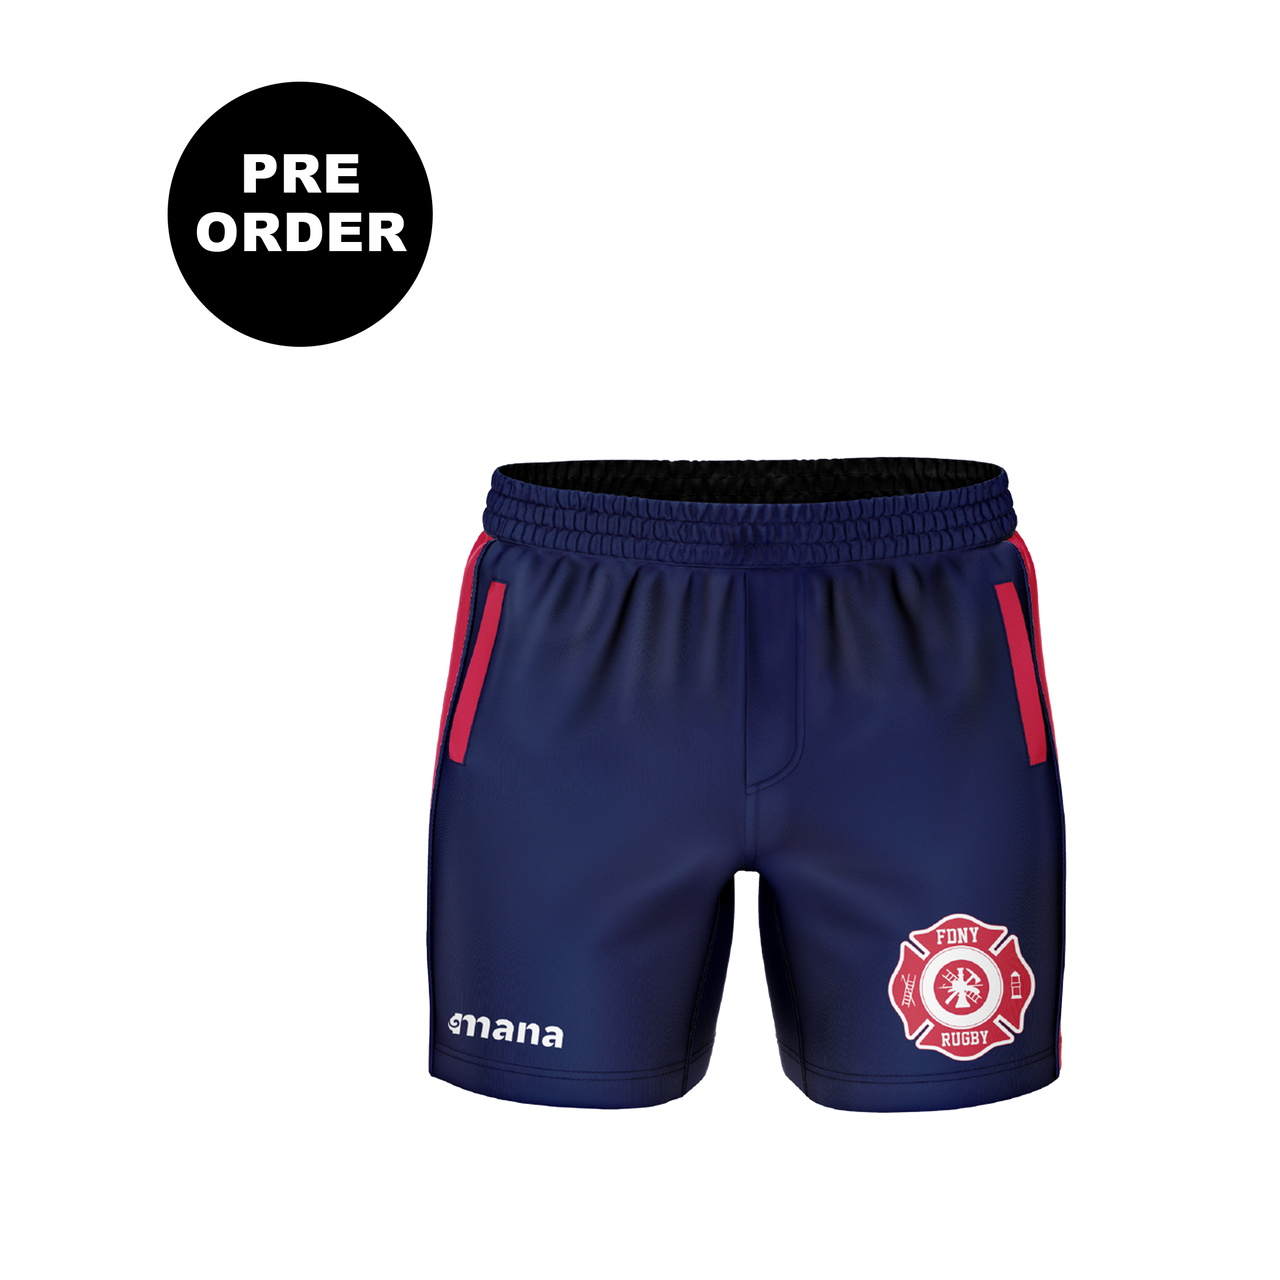 FDNY Rugby Gym Shorts